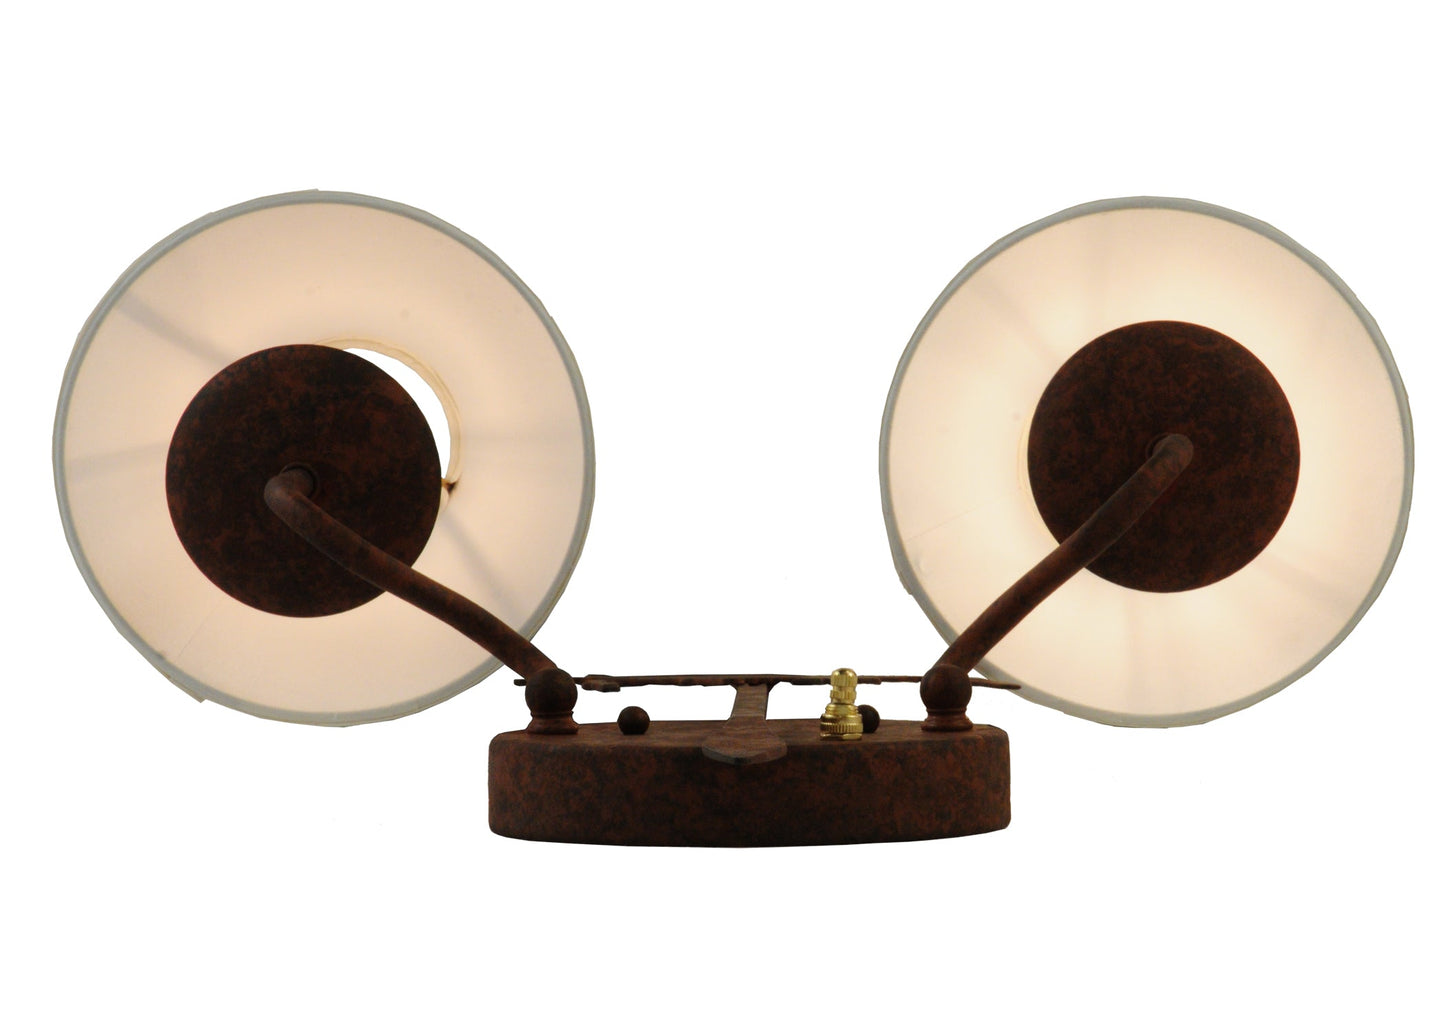 18" High Plains Rider 2-Light Wall Sconce by 2nd Ave Lighting